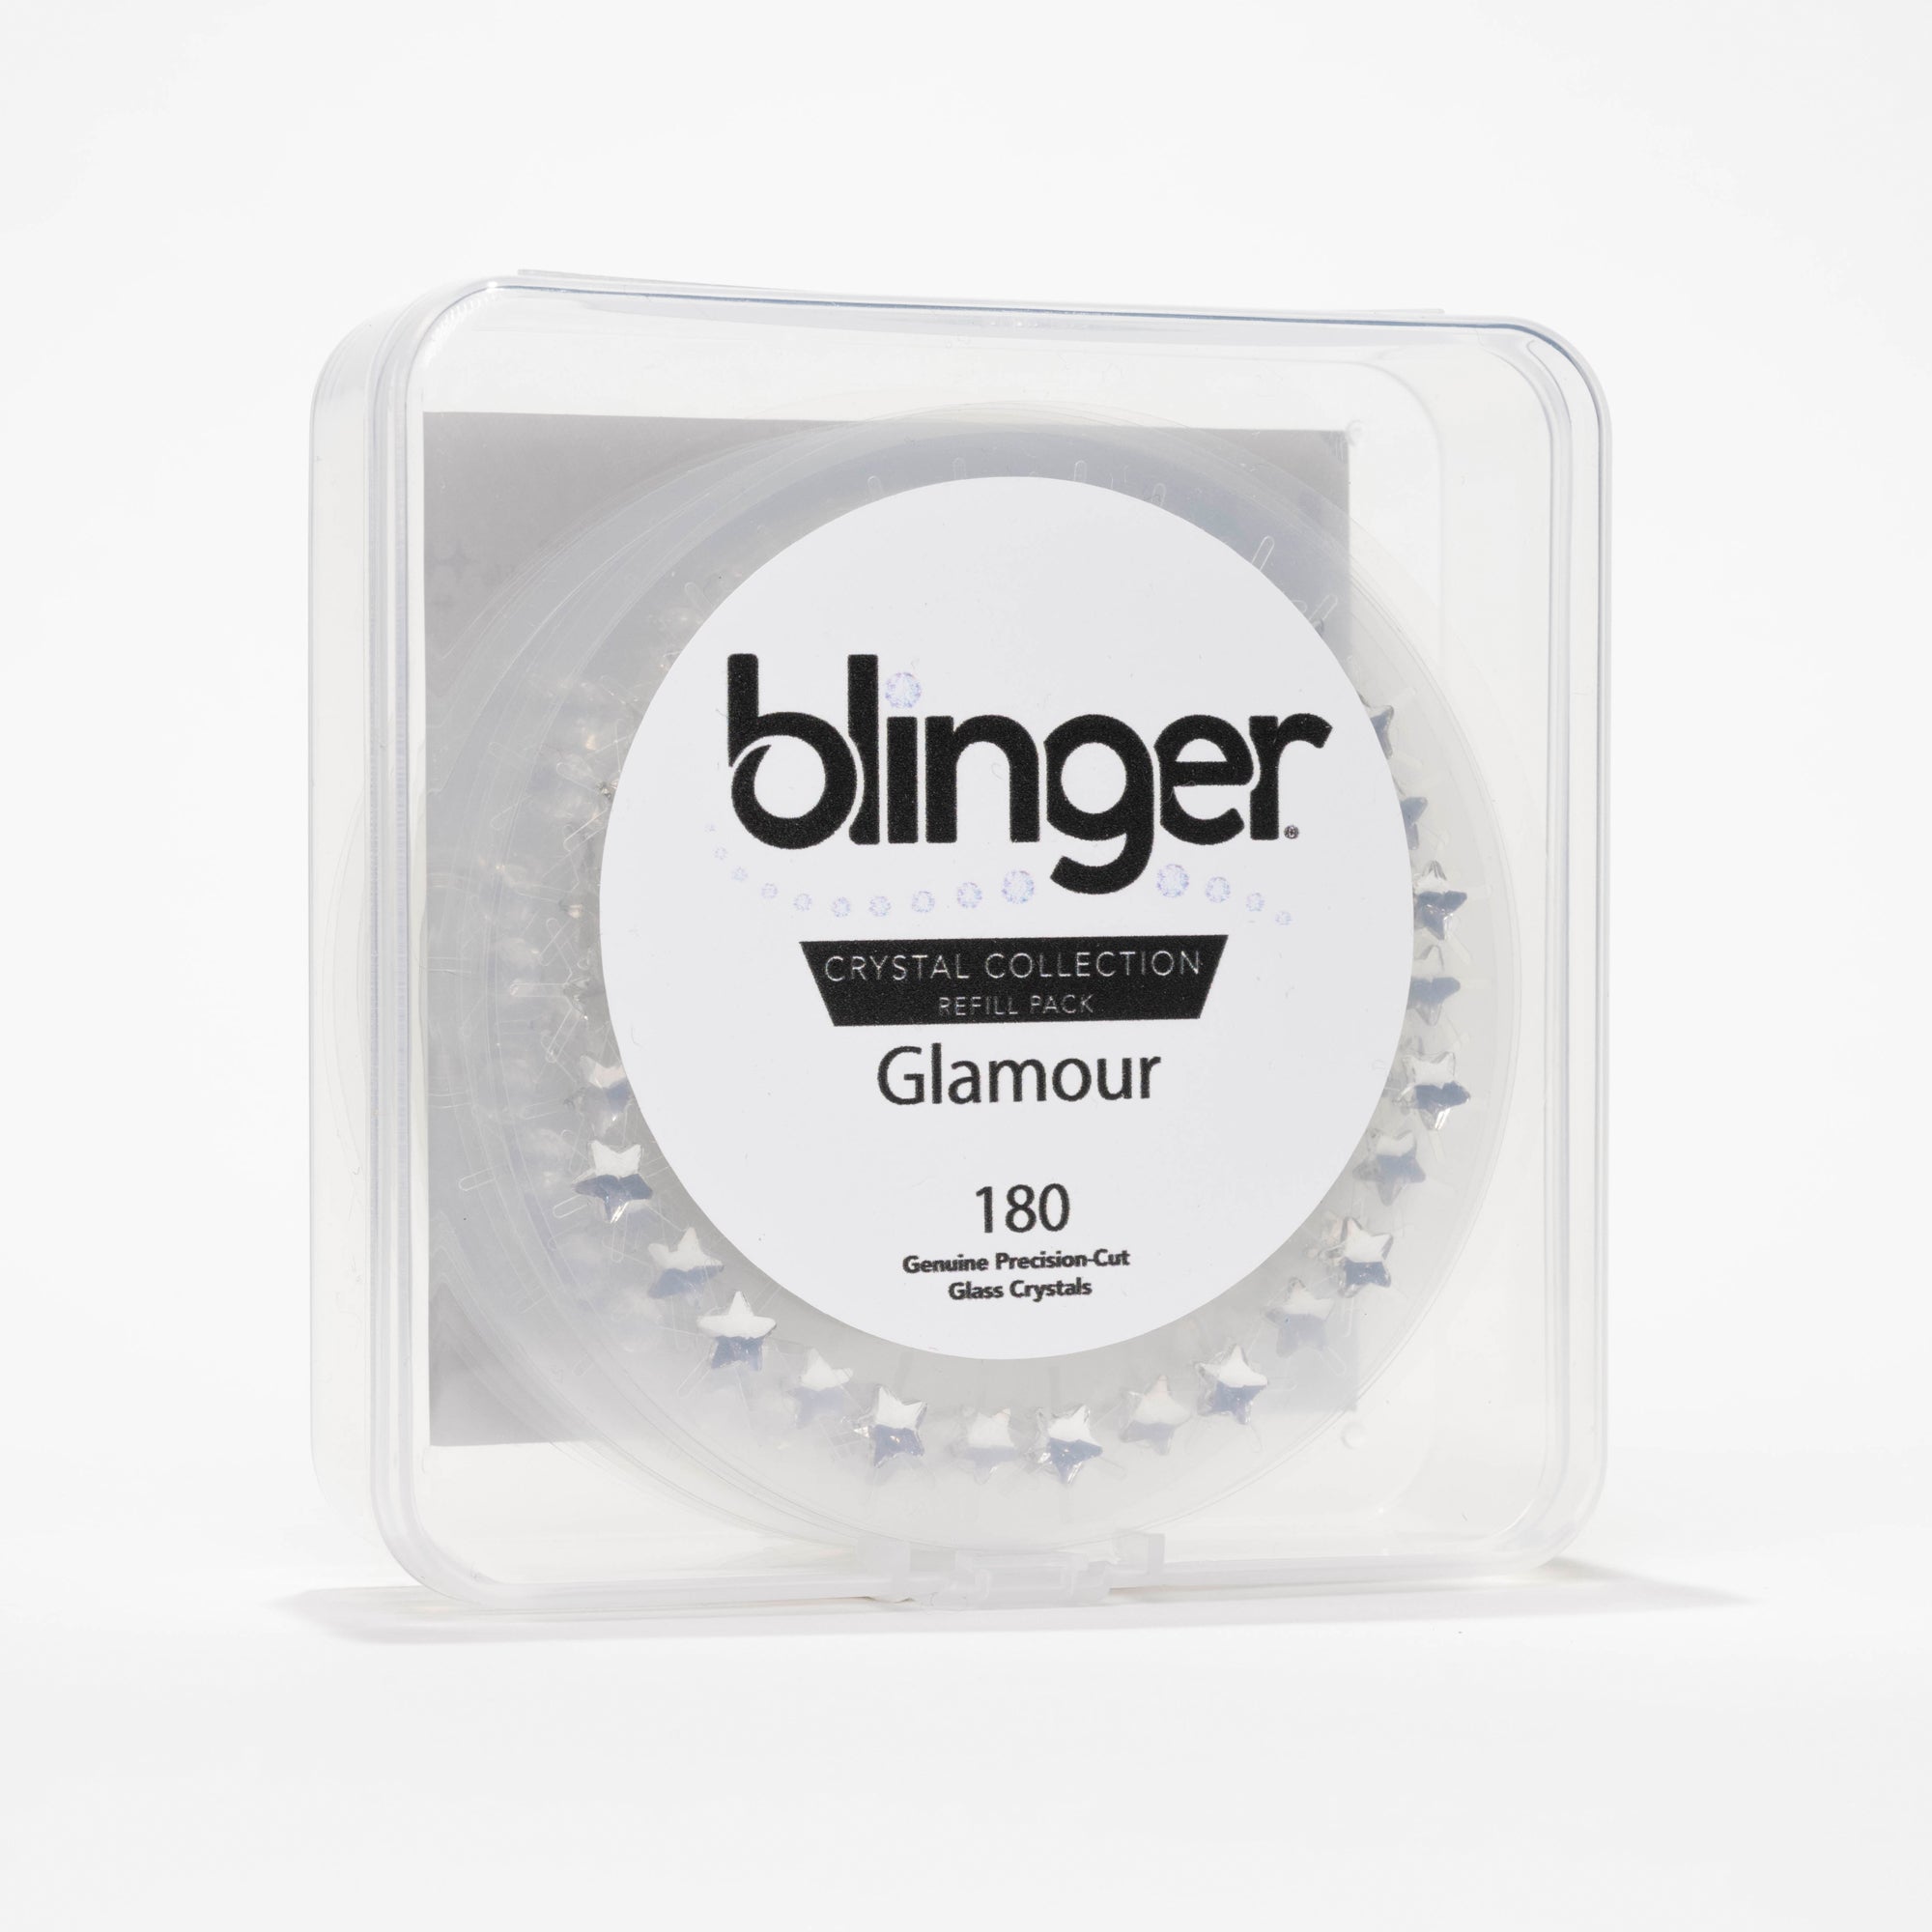 Blinger Starter Kit | Women's Hair Styling Tool + 75 precision-cut Glass Crystals | Bling Hair in Seconds! Bedazzling Multi-Faceted Gems | Hair-Safe